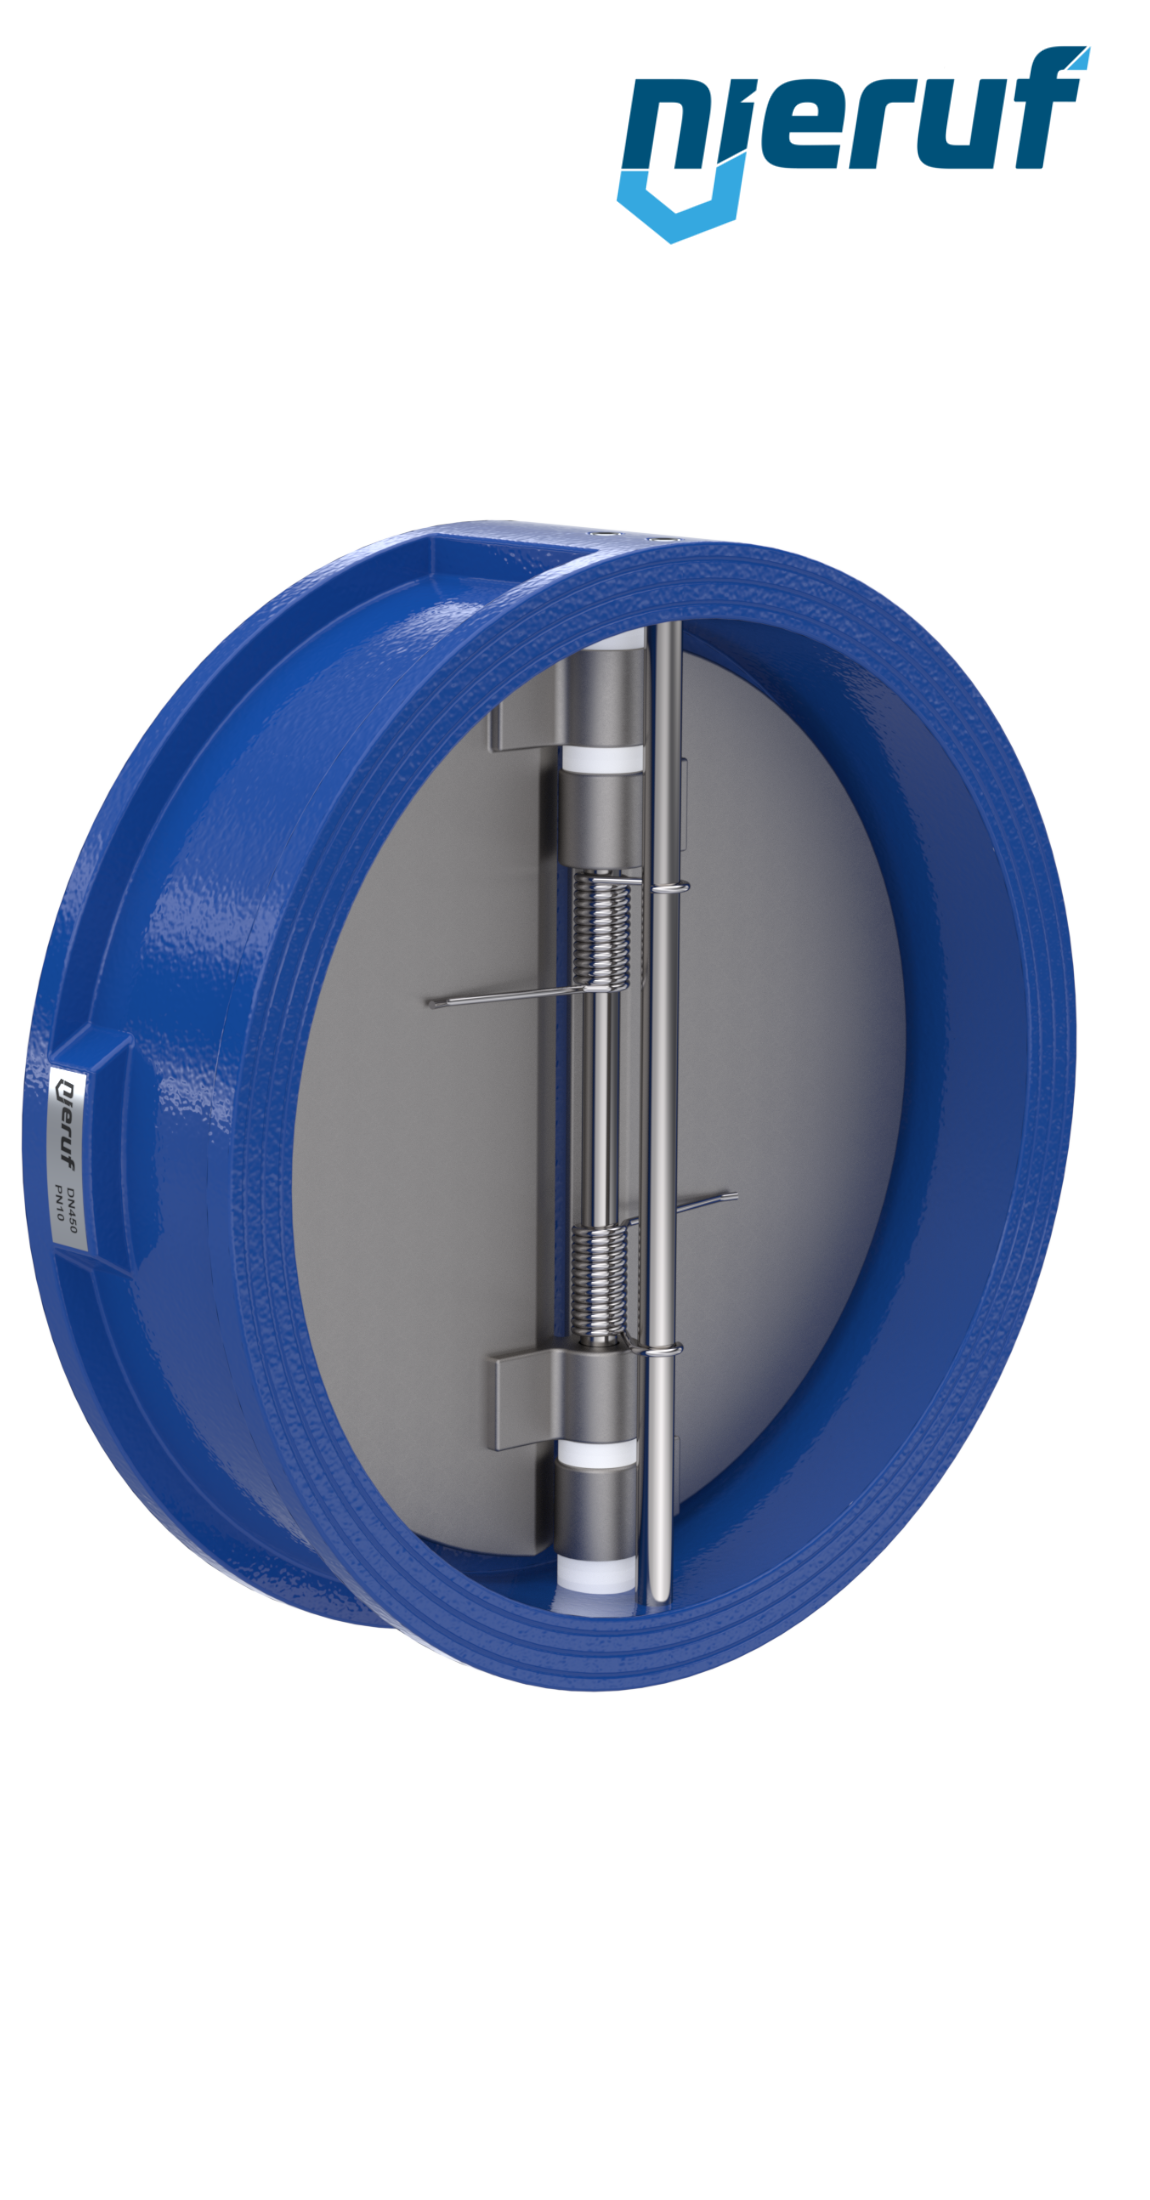 dual plate check valve DN450 DR01 GGG40 epoxyd plated blue 180µm EPDM